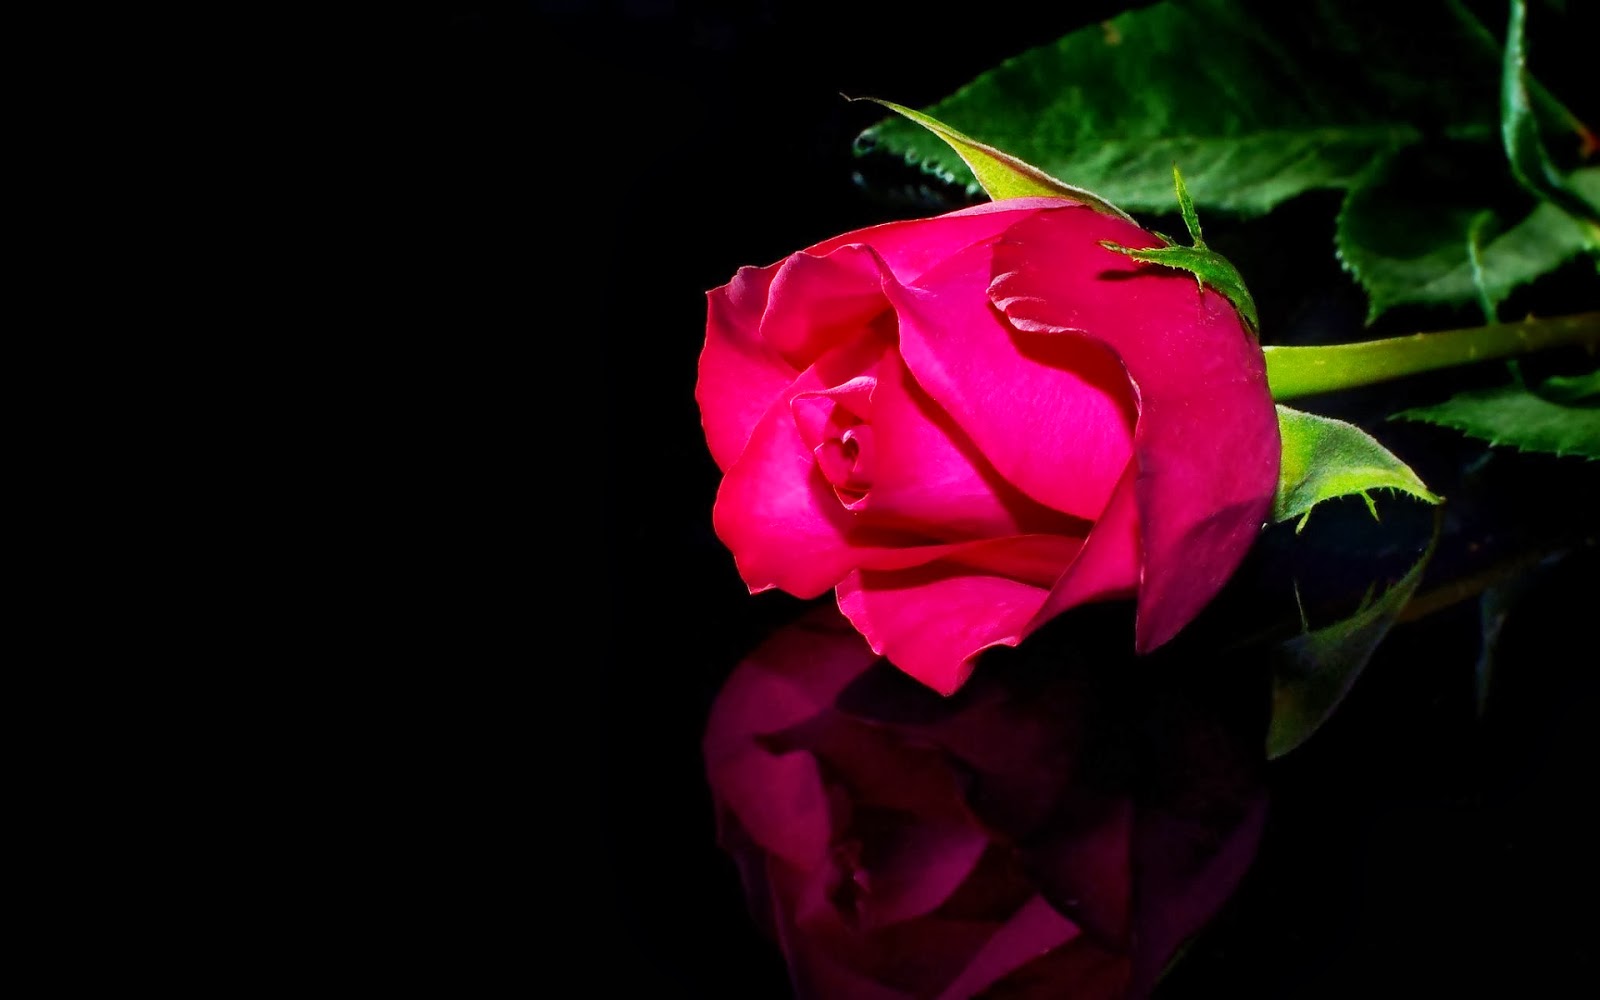 Black Background Images With Roses - HD Wallpaper 